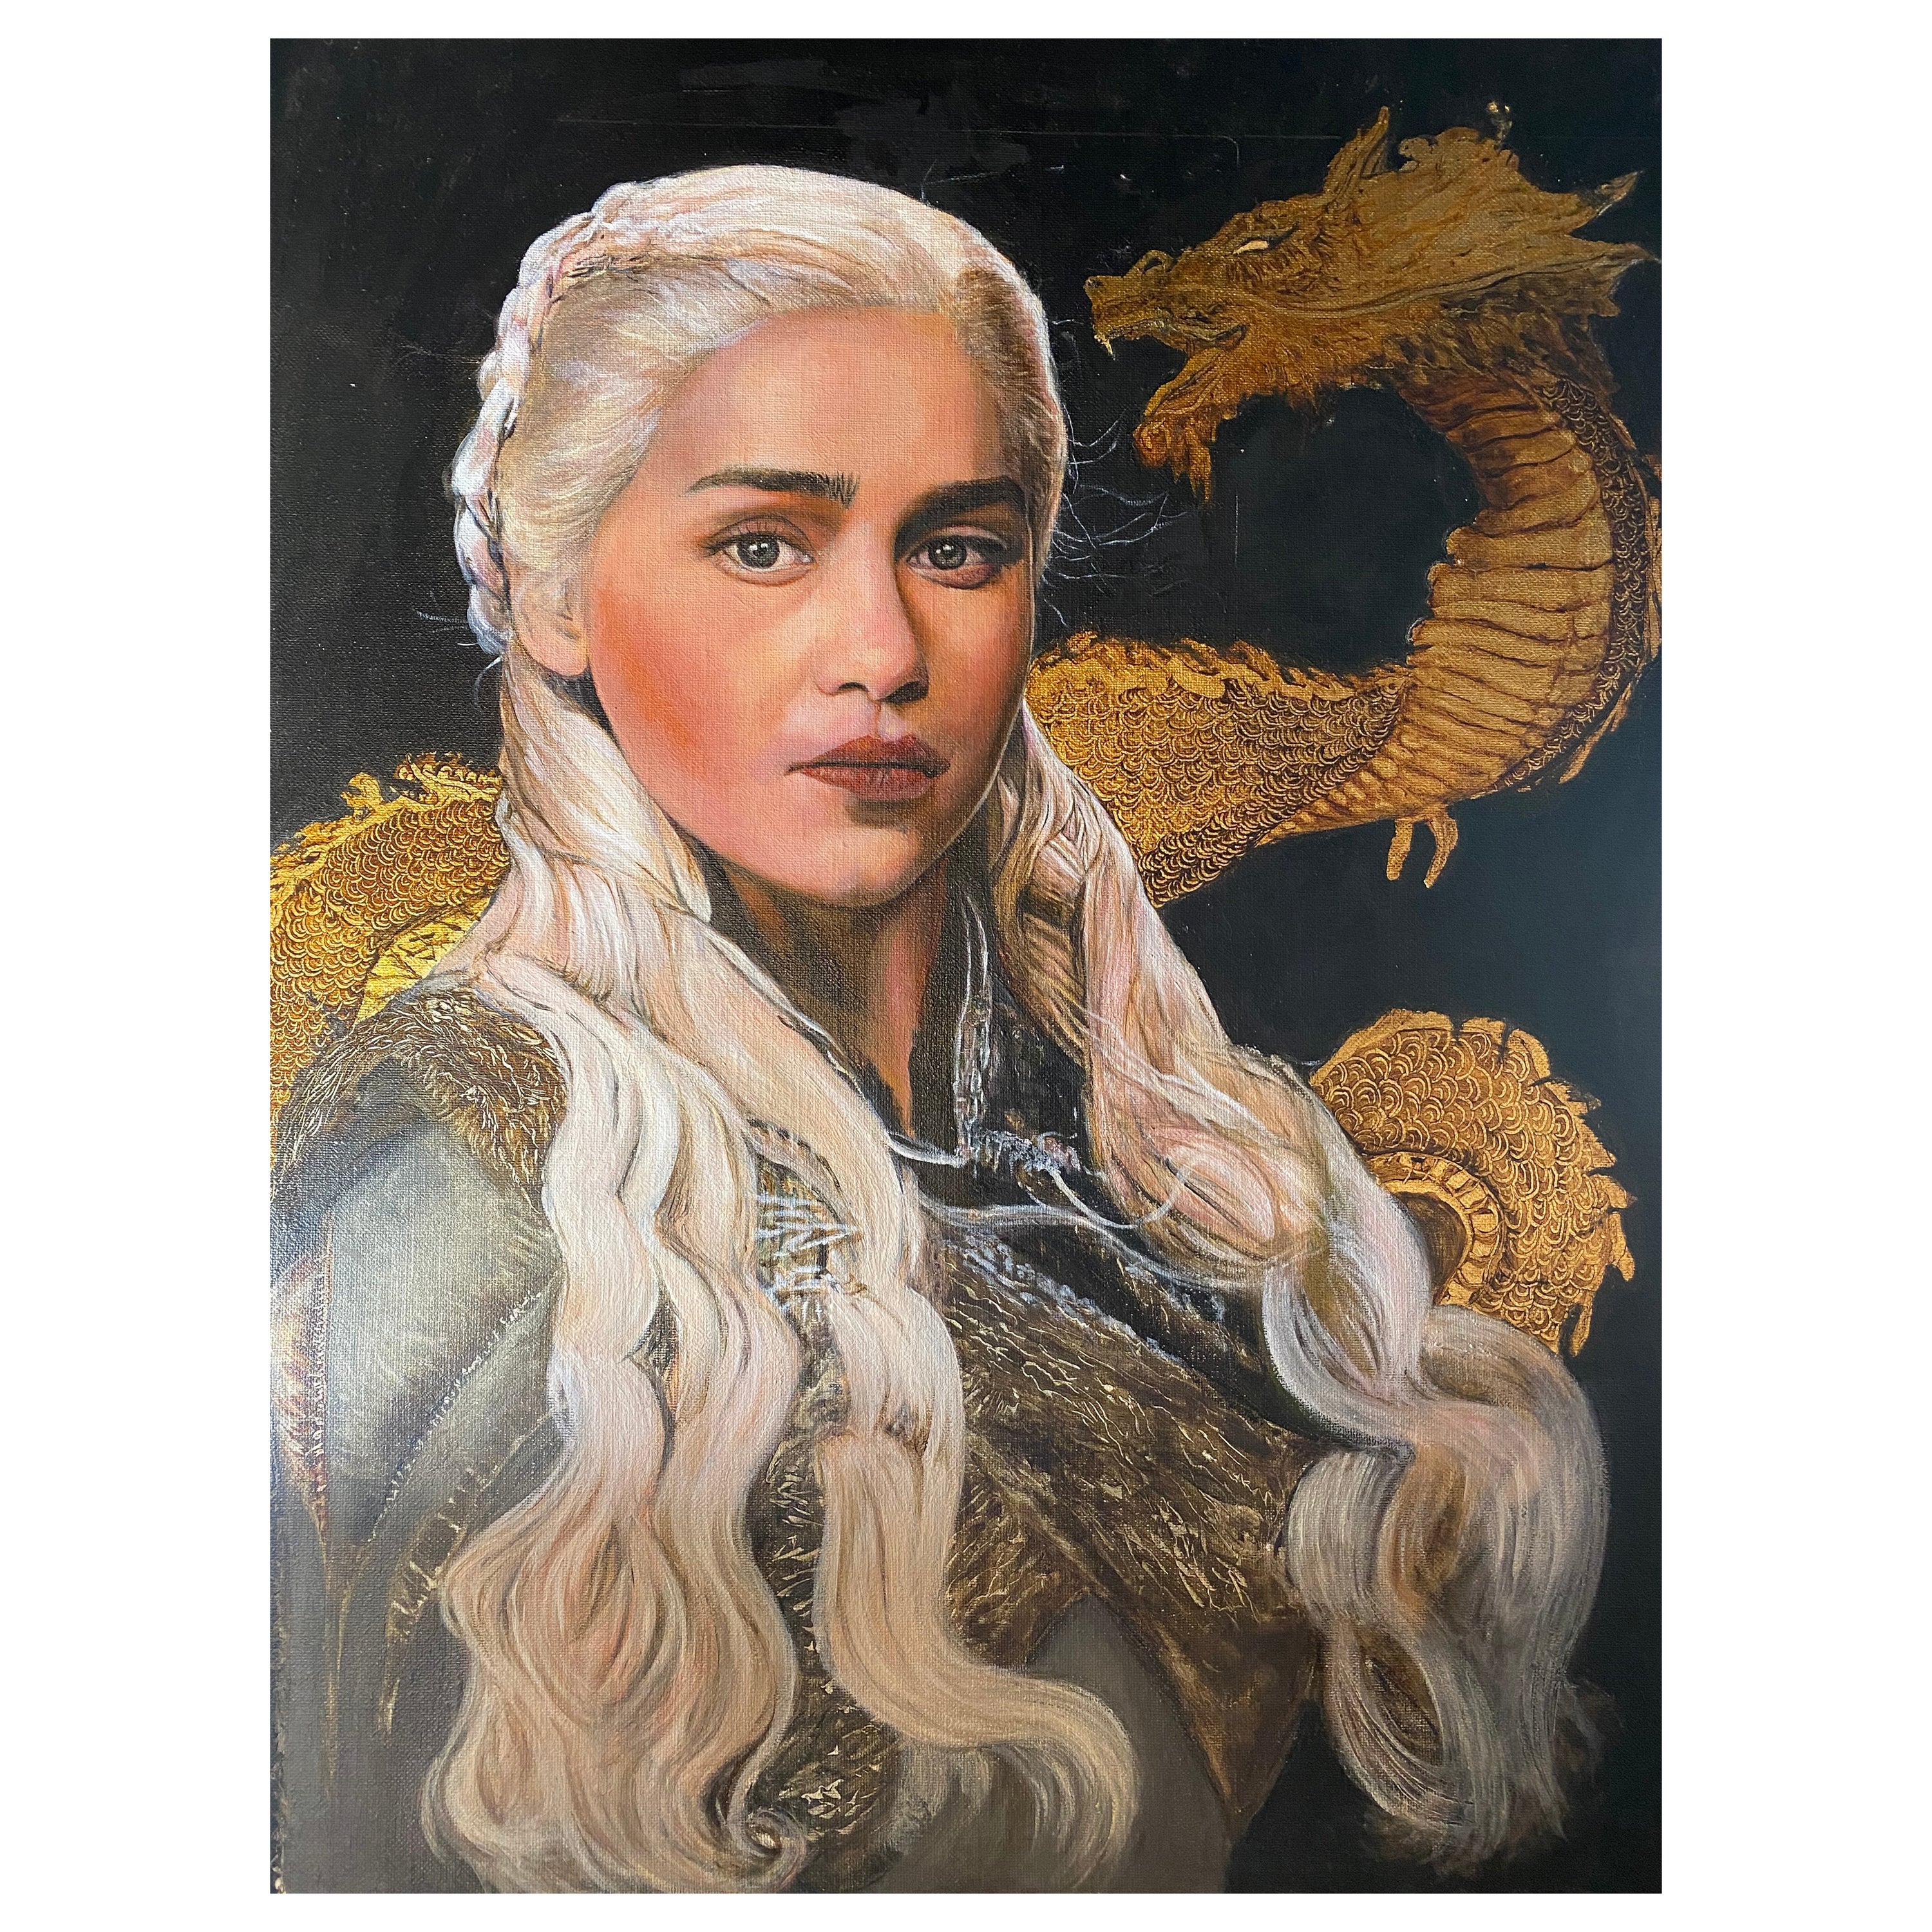 Slice Daenerys 'Game of Thrones' For Sale